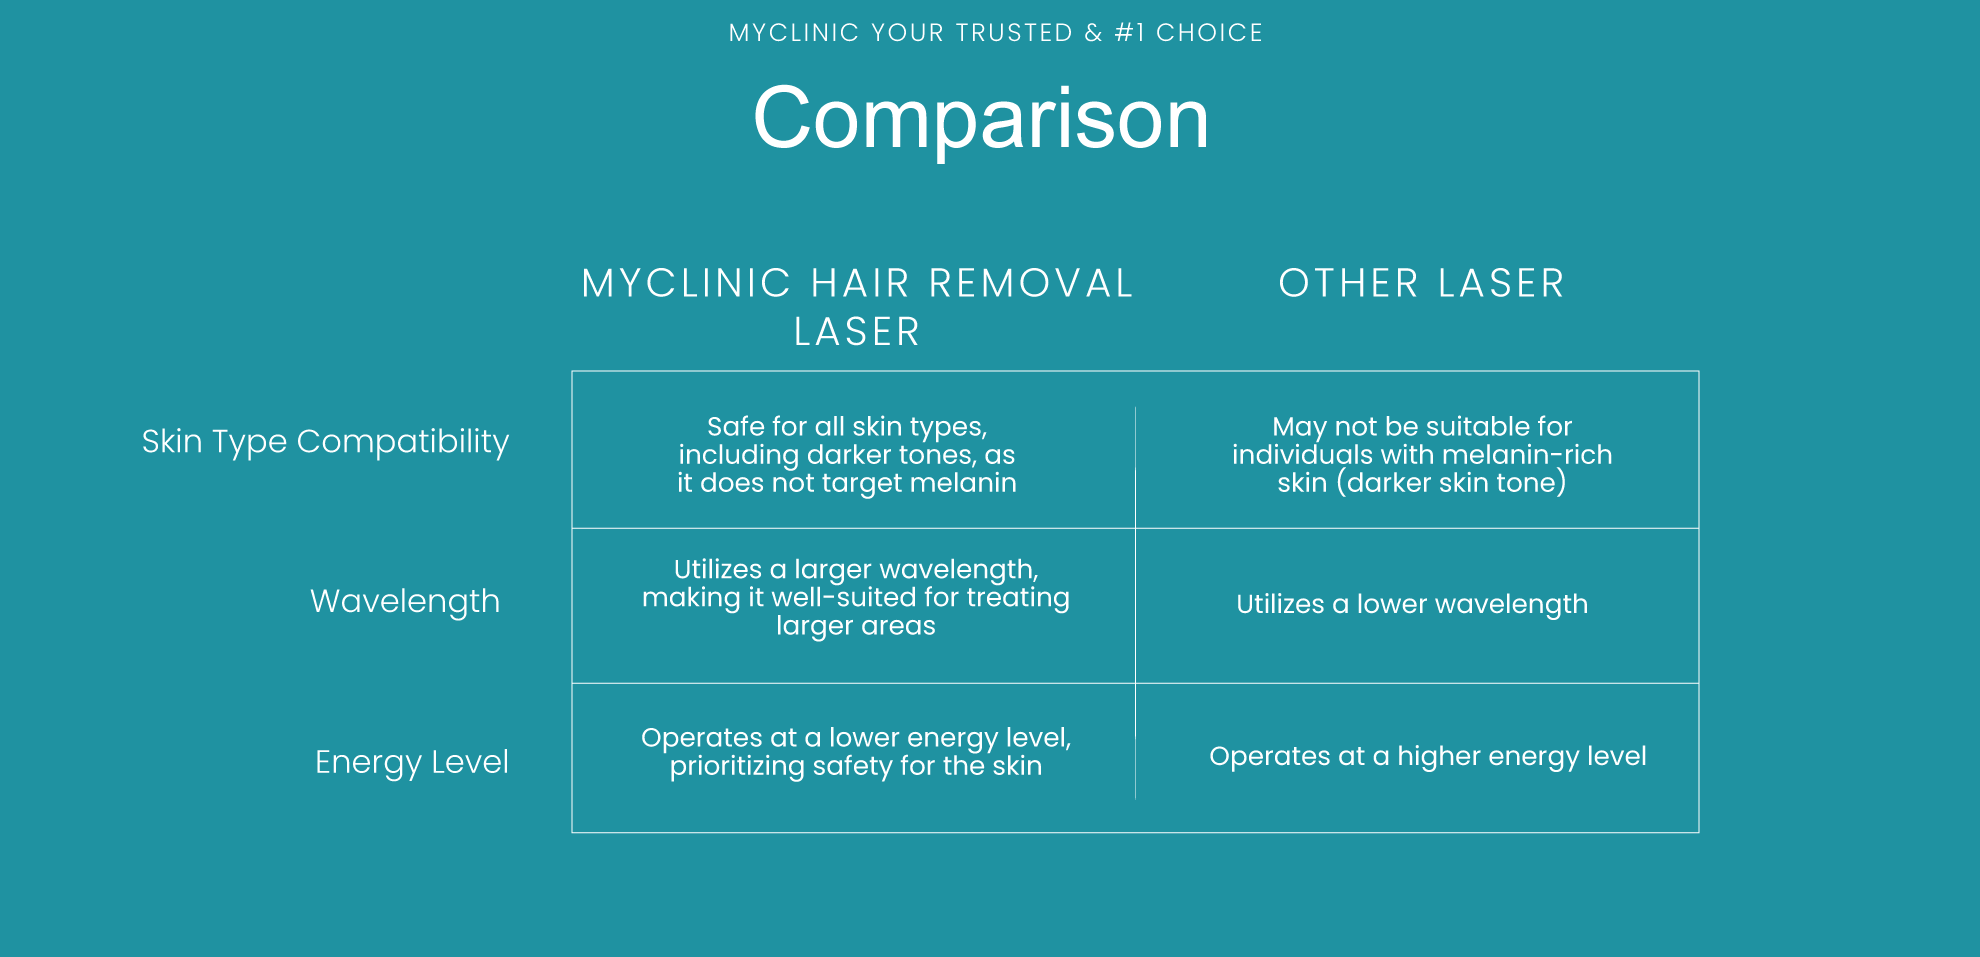 Comparison table of myclinic hair removal laser vs other laser